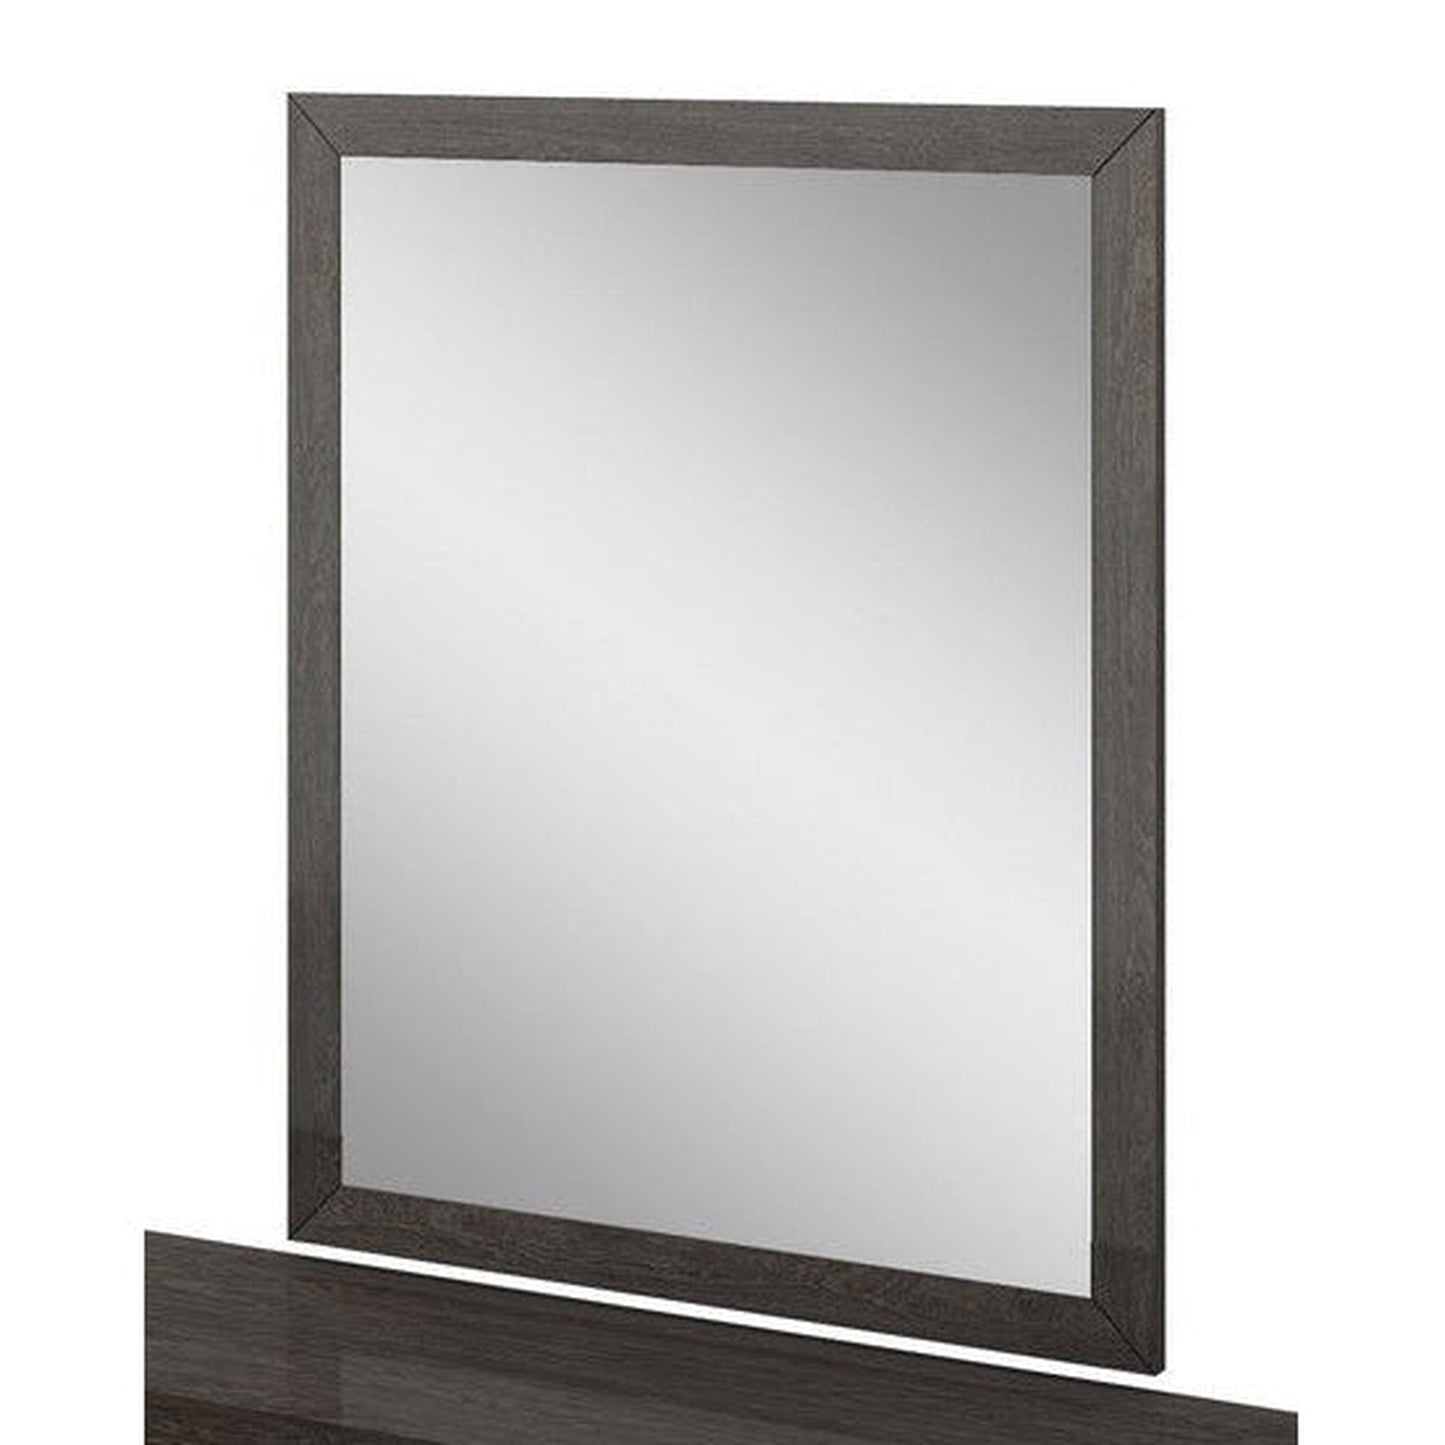 HomeRoots 43" Refined High Gloss Mirror In Grey Finish